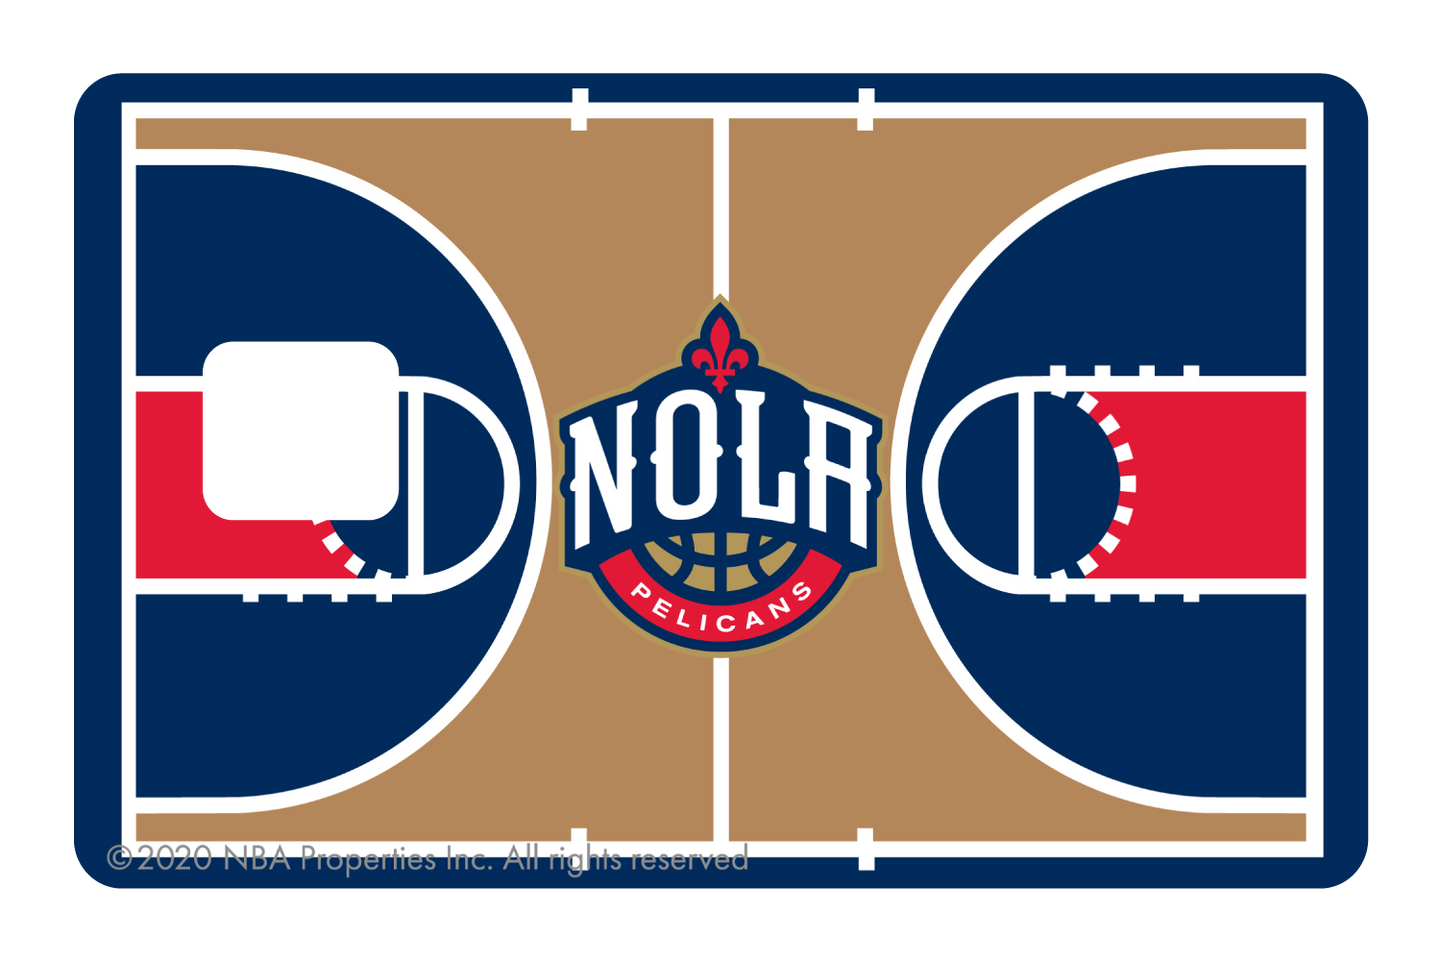 New Orleans Pelicans: Courtside